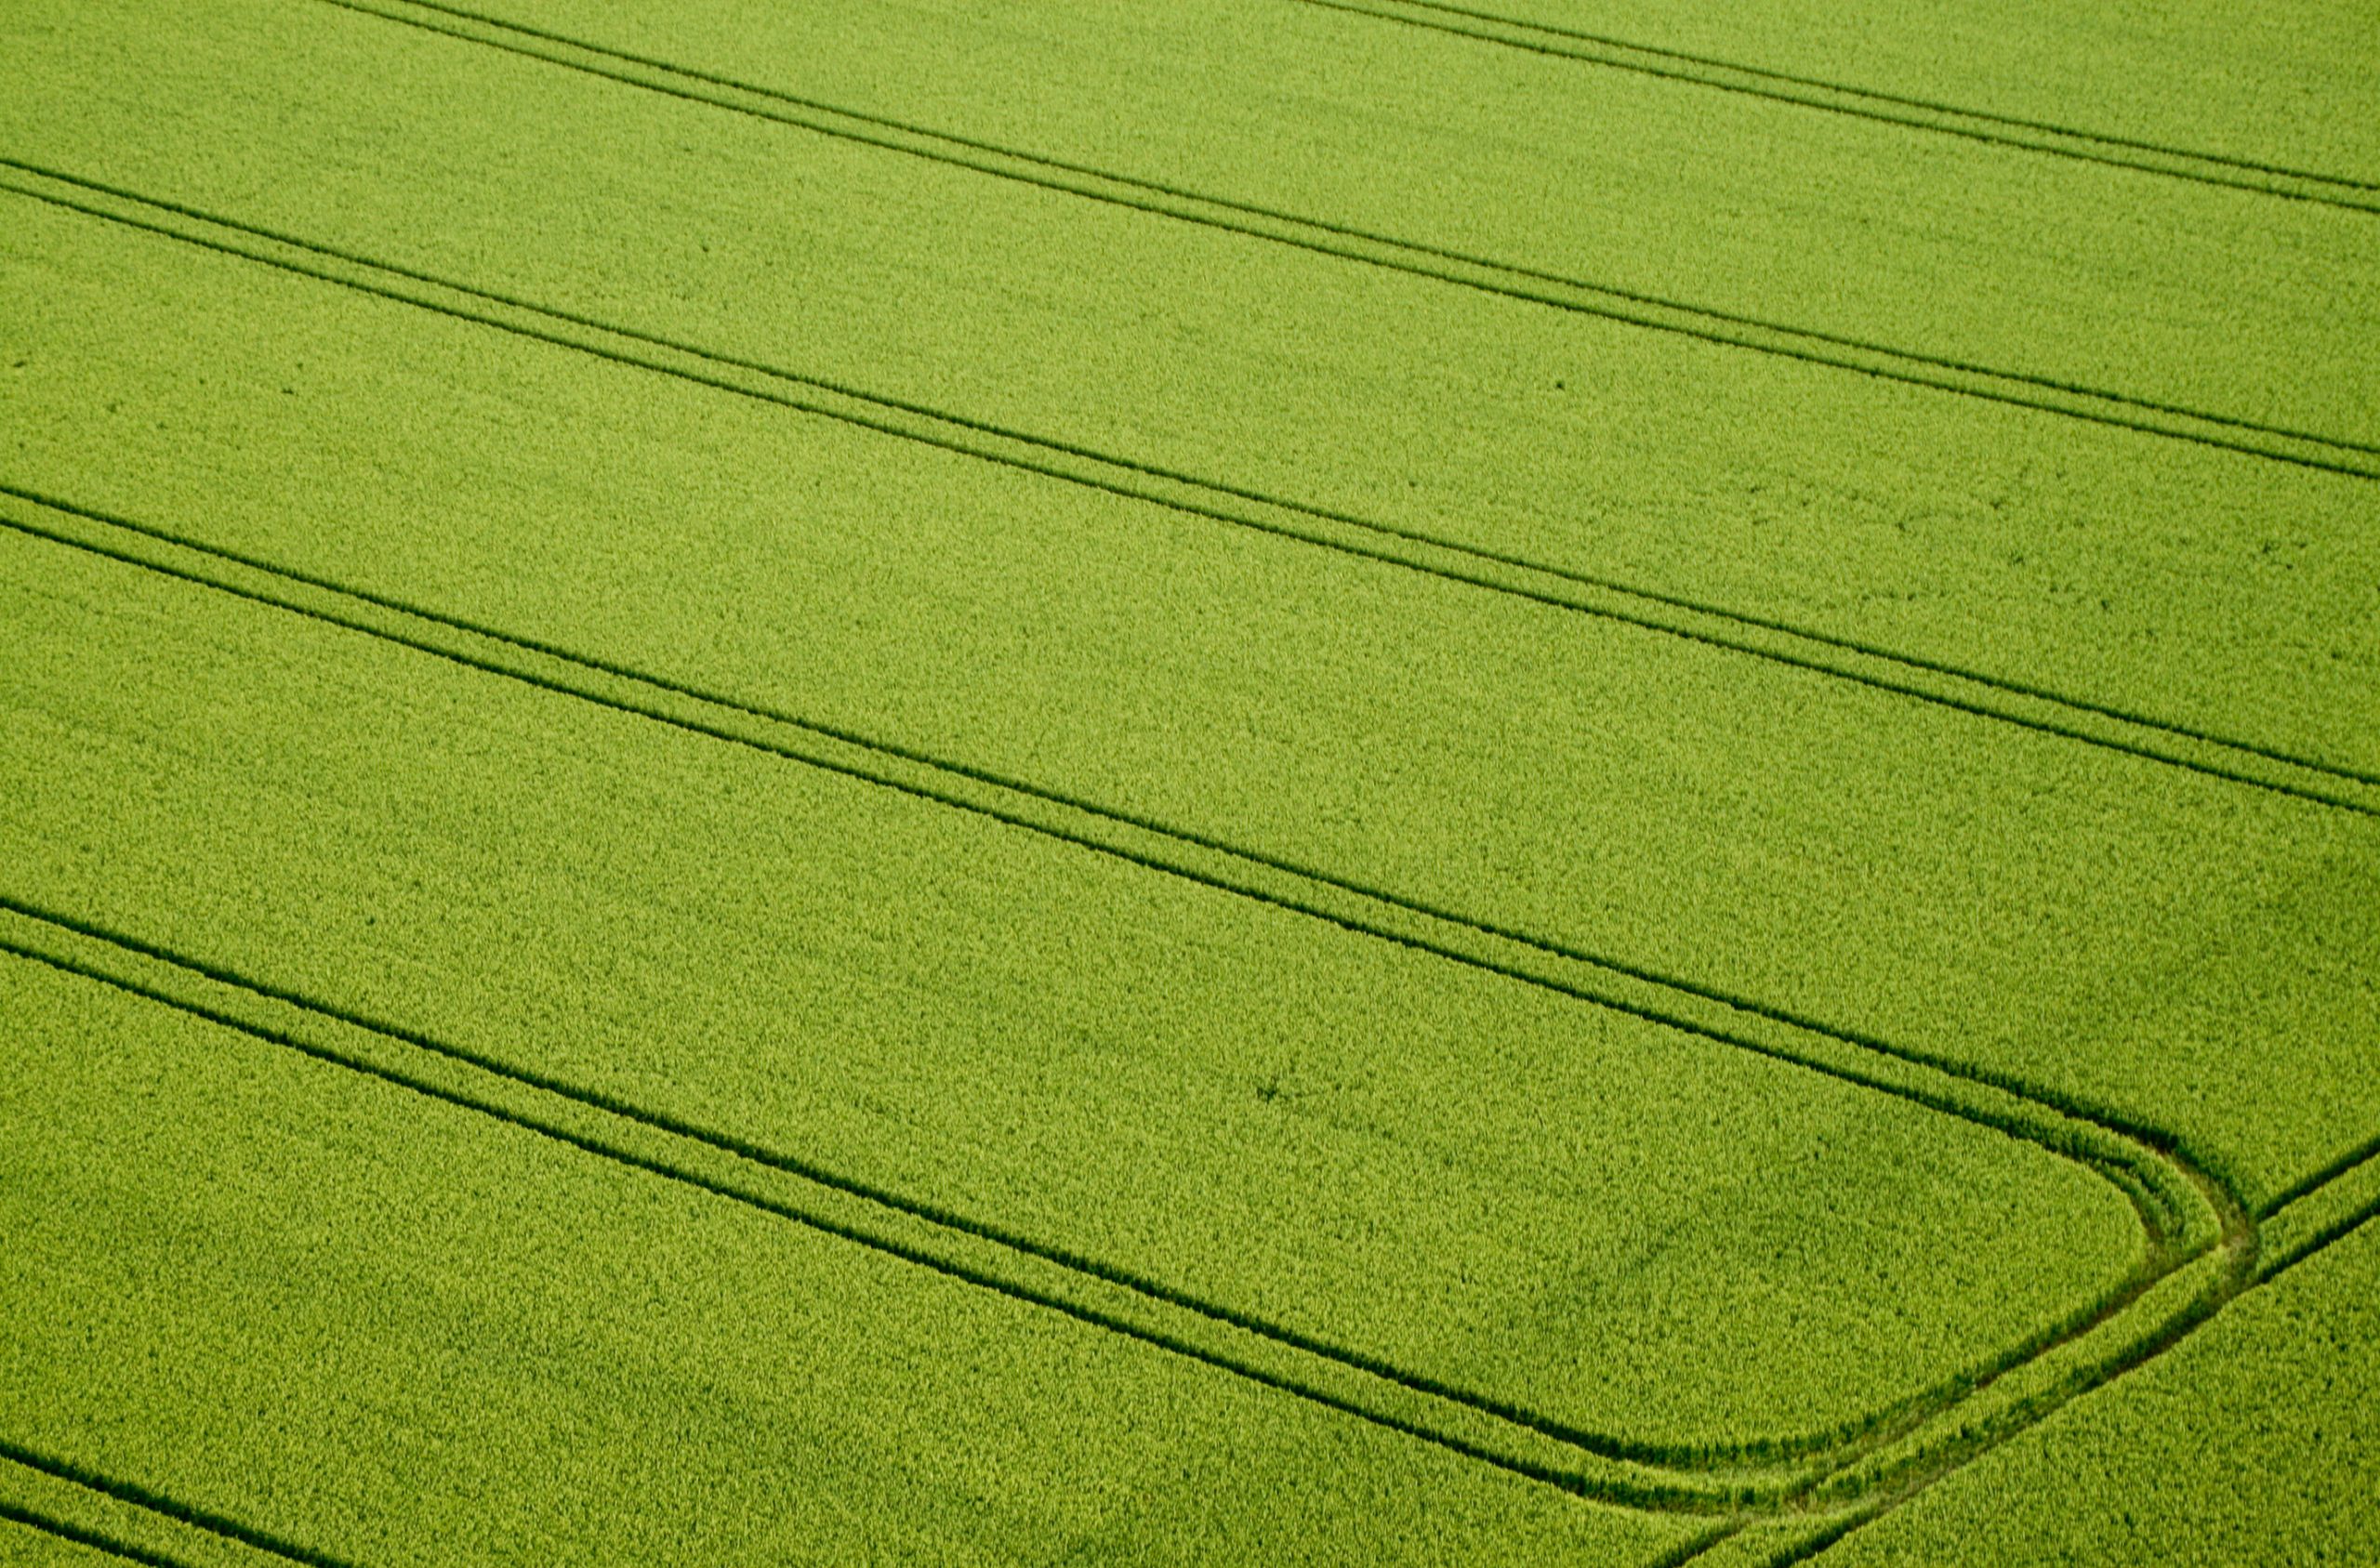 New insights in climate change and its effect on crop yields. Photo: Dreamstime